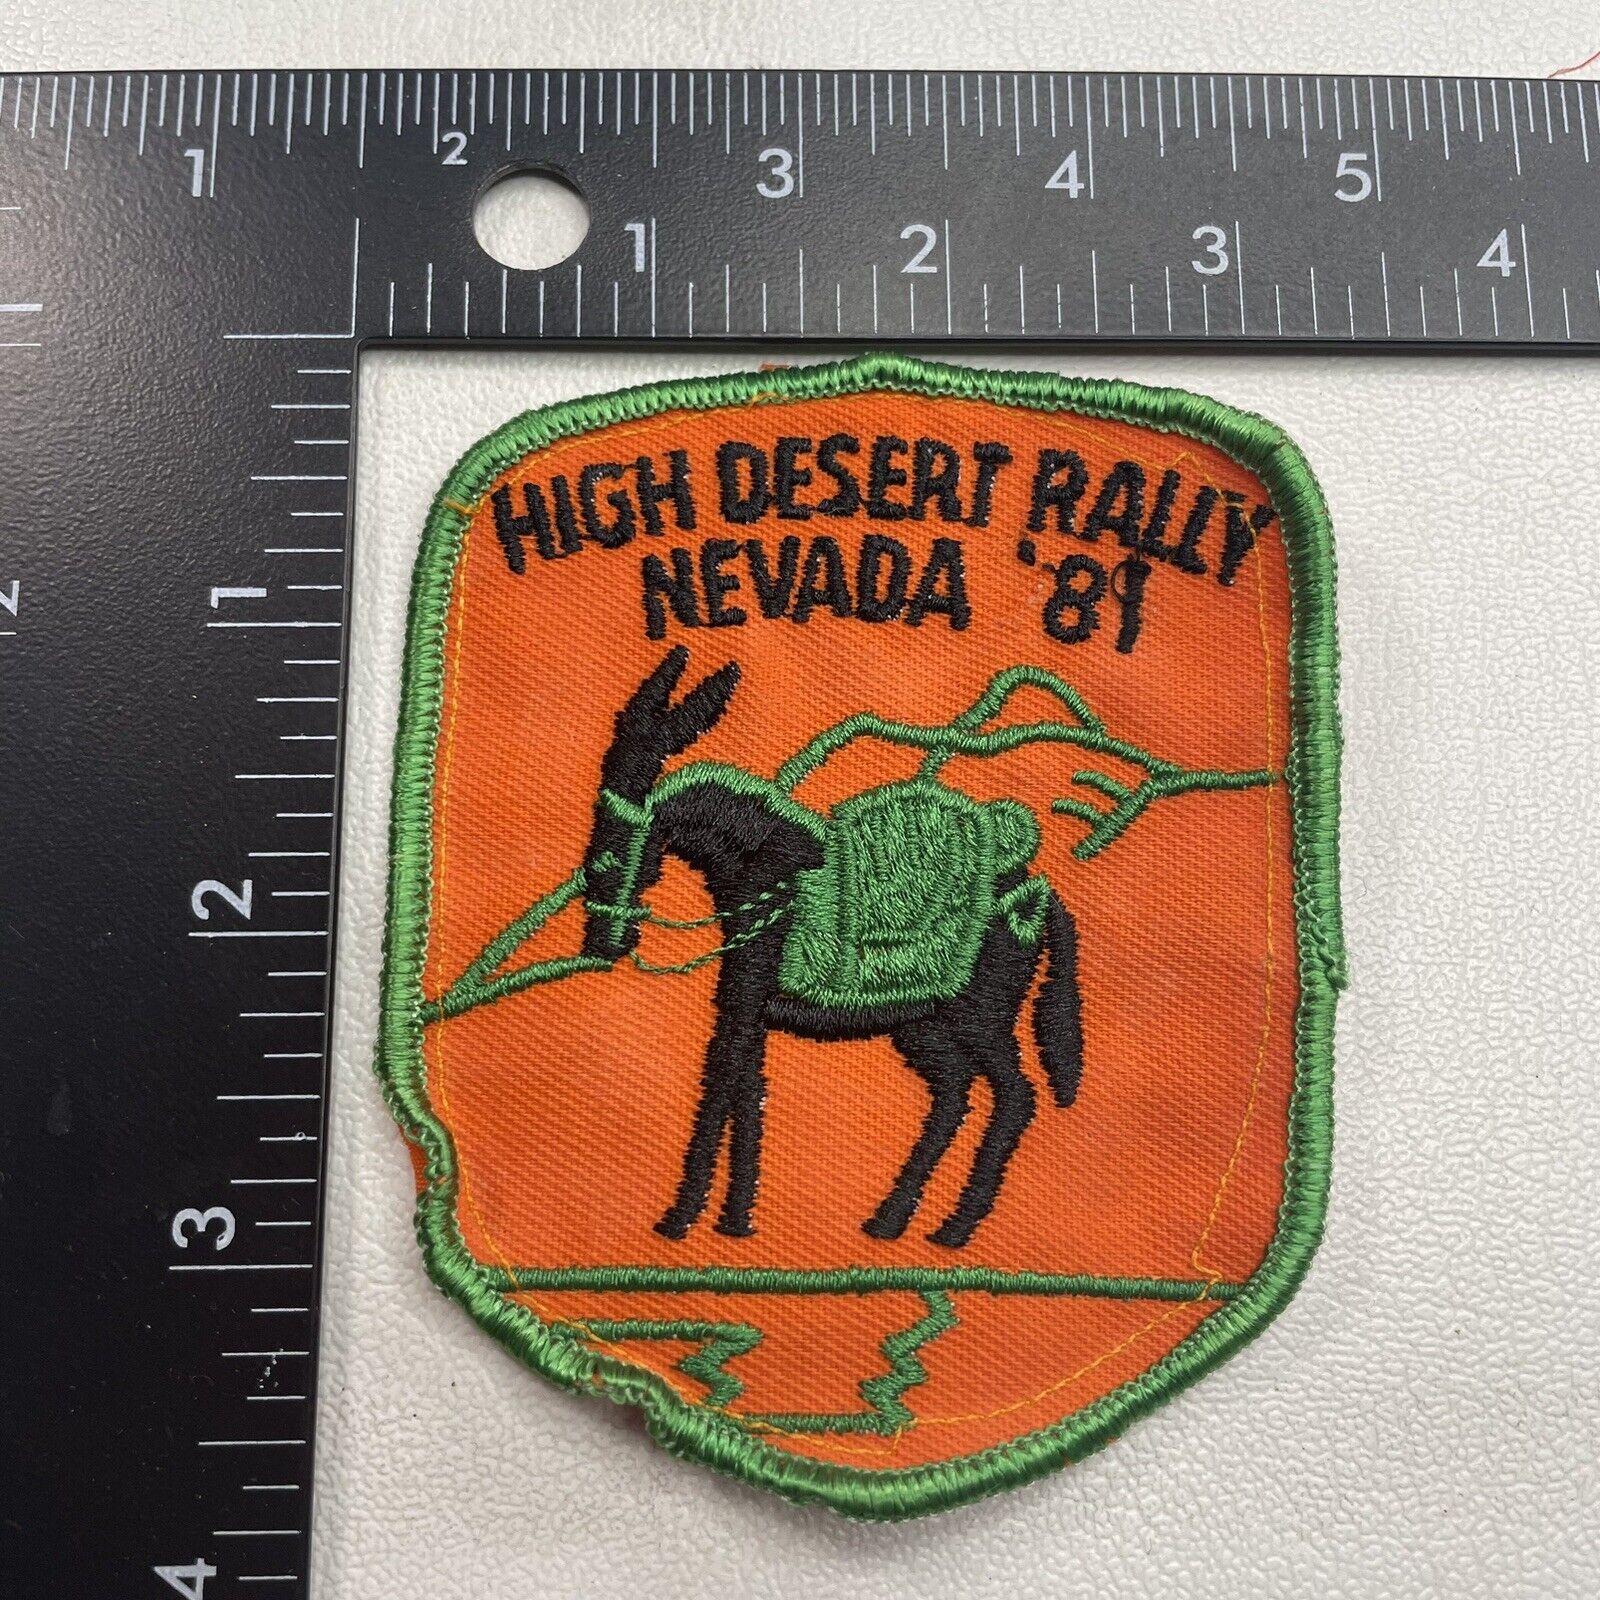 Vtg 1981 NEVADA HIGH DESERT RALLY Off Road Vehicle Patch 20E0